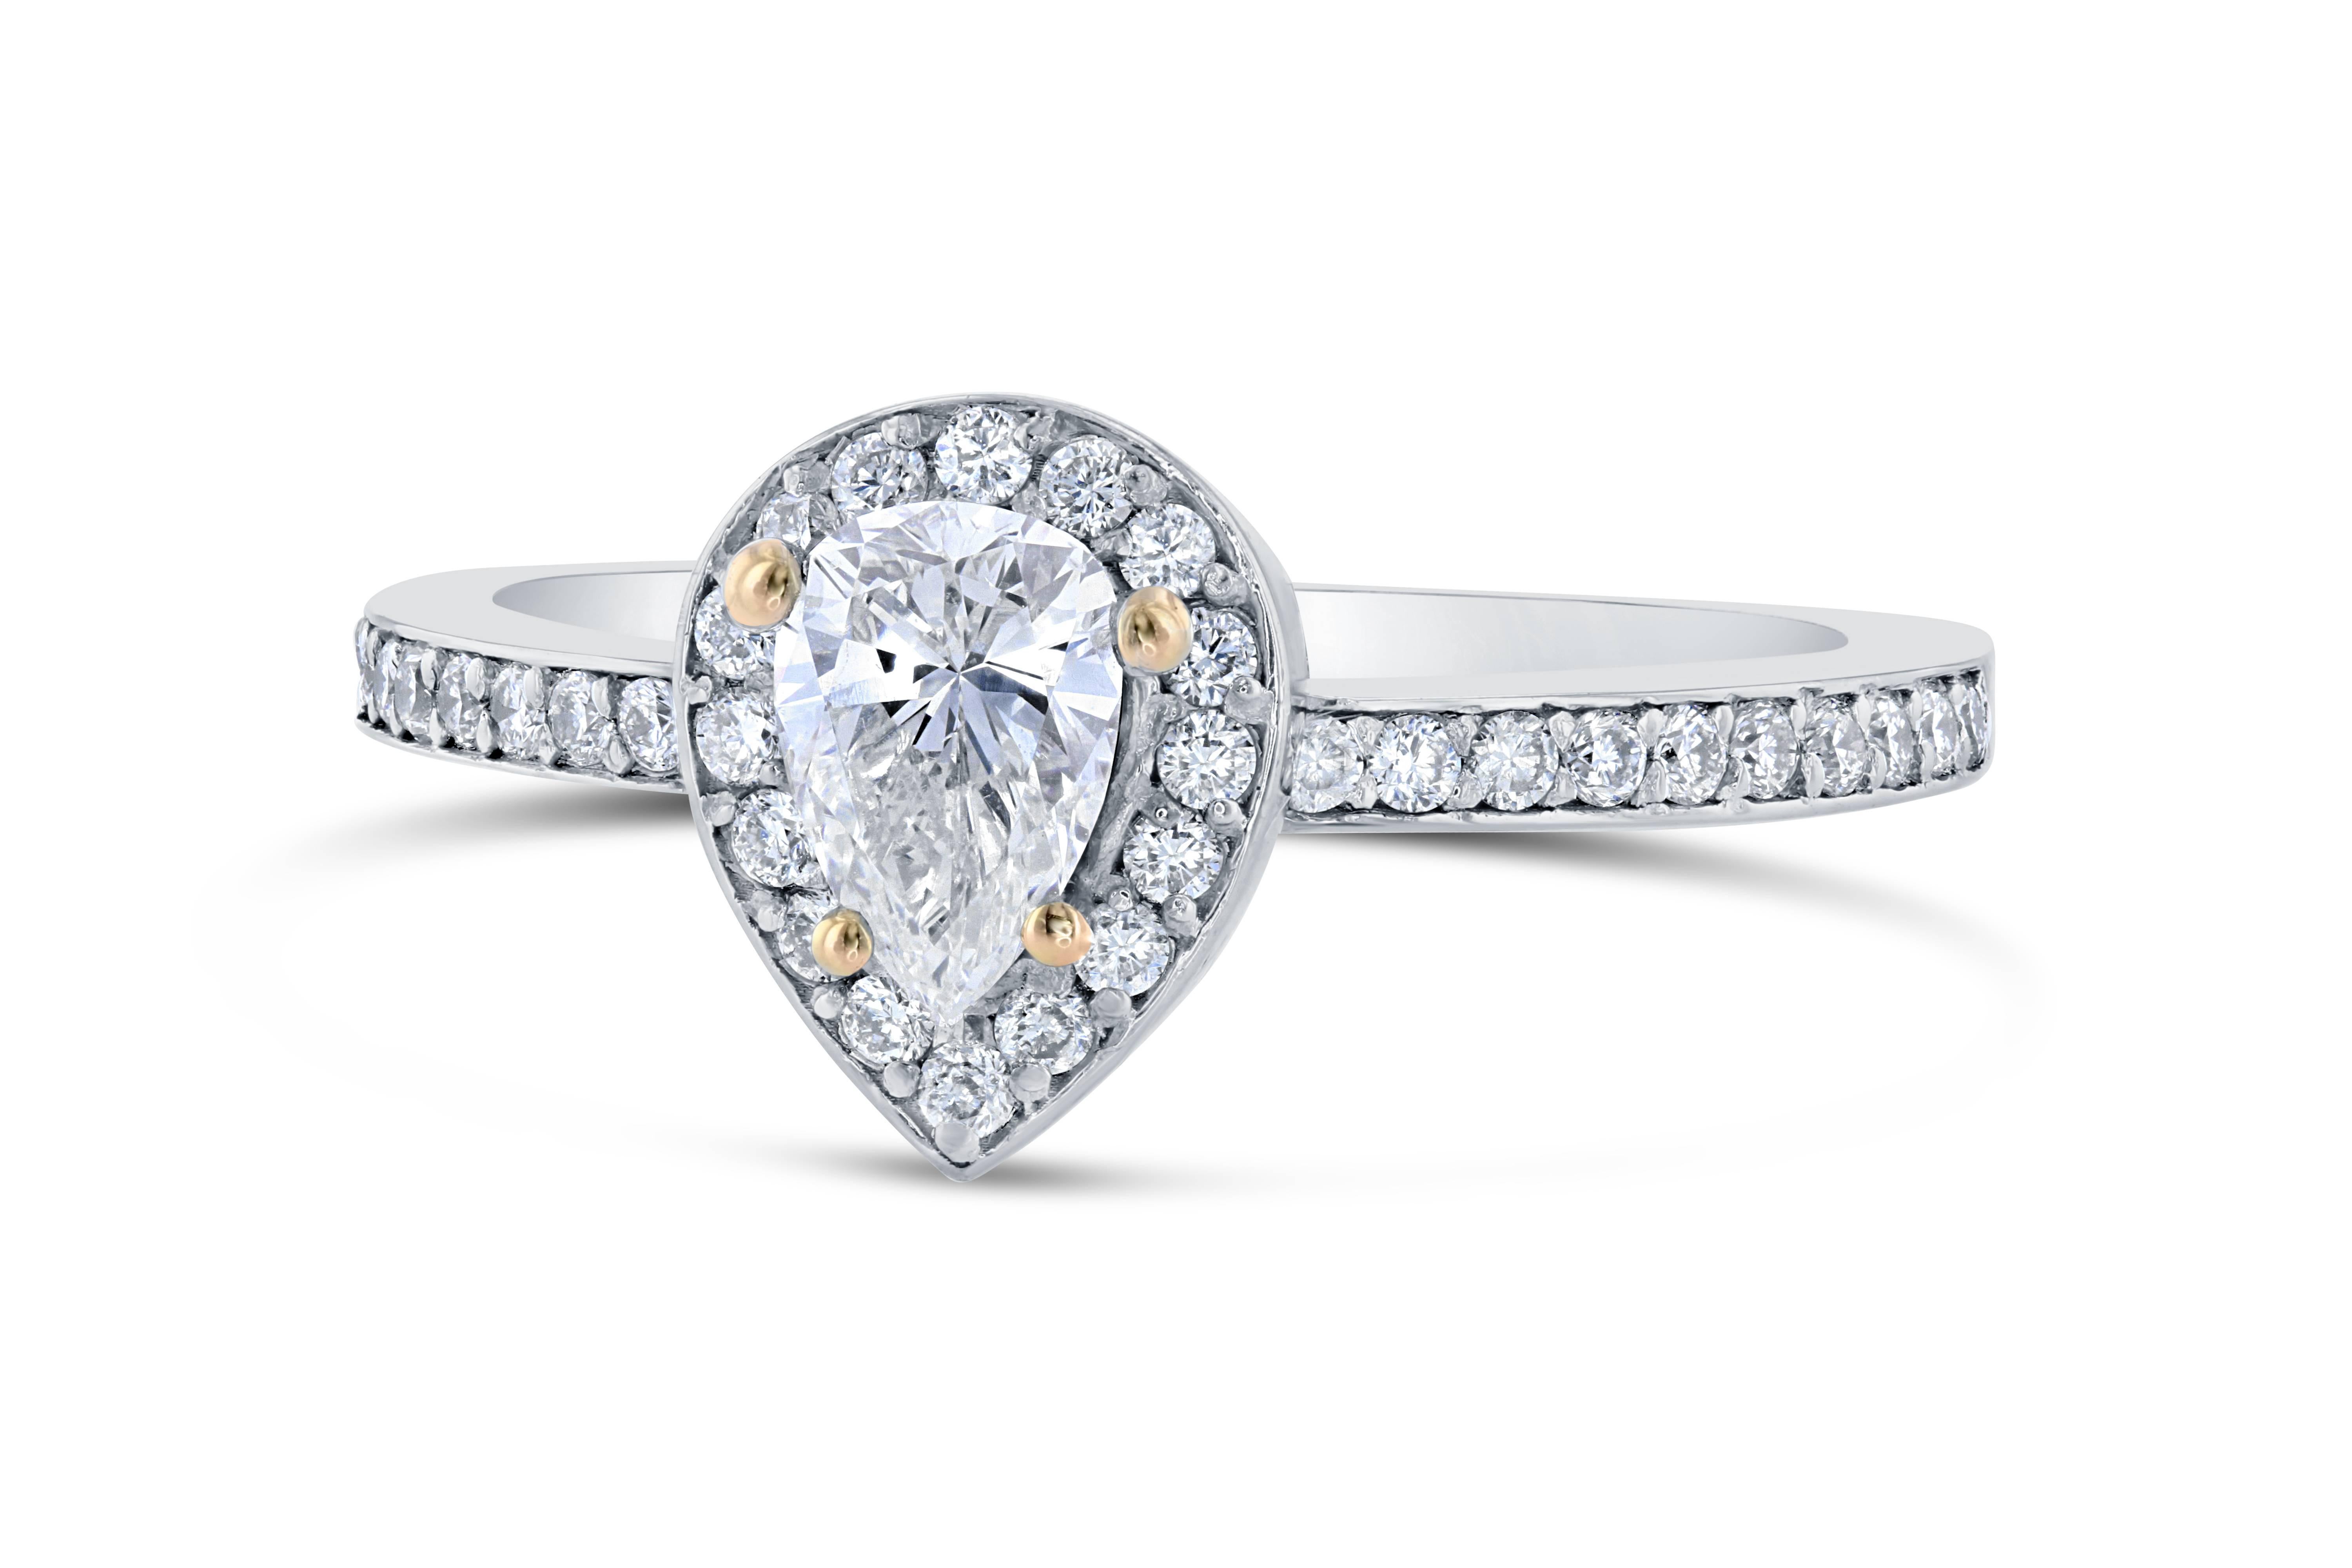 A beautiful pear cut diamond ring that can be an engagement, bridal, or an everyday ring!

The center Pear Cut Diamond is 0.47 Carats surrounded by a halo of 36 Round Cut Diamonds that weigh 0.31 Carats. The clarity and color of both the center and